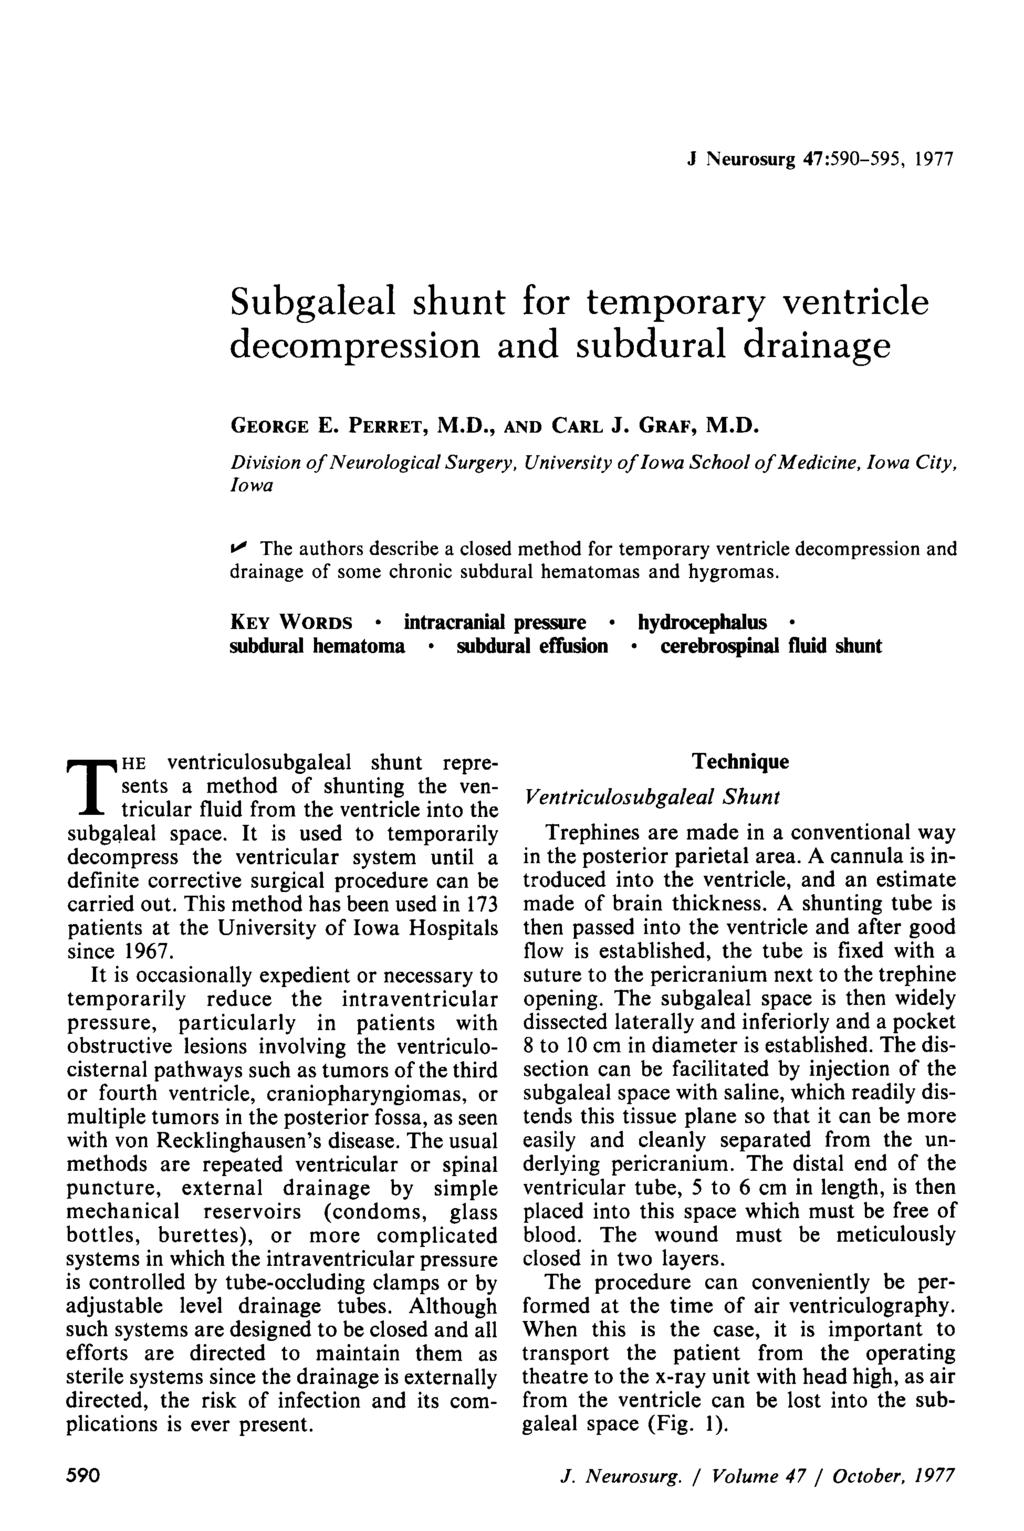 J Neurosurg 47:590-595, 1977 Subgaleal shunt for temporary ventricle decompression and subdural drainage GEORGE E. PERRET, M.D.